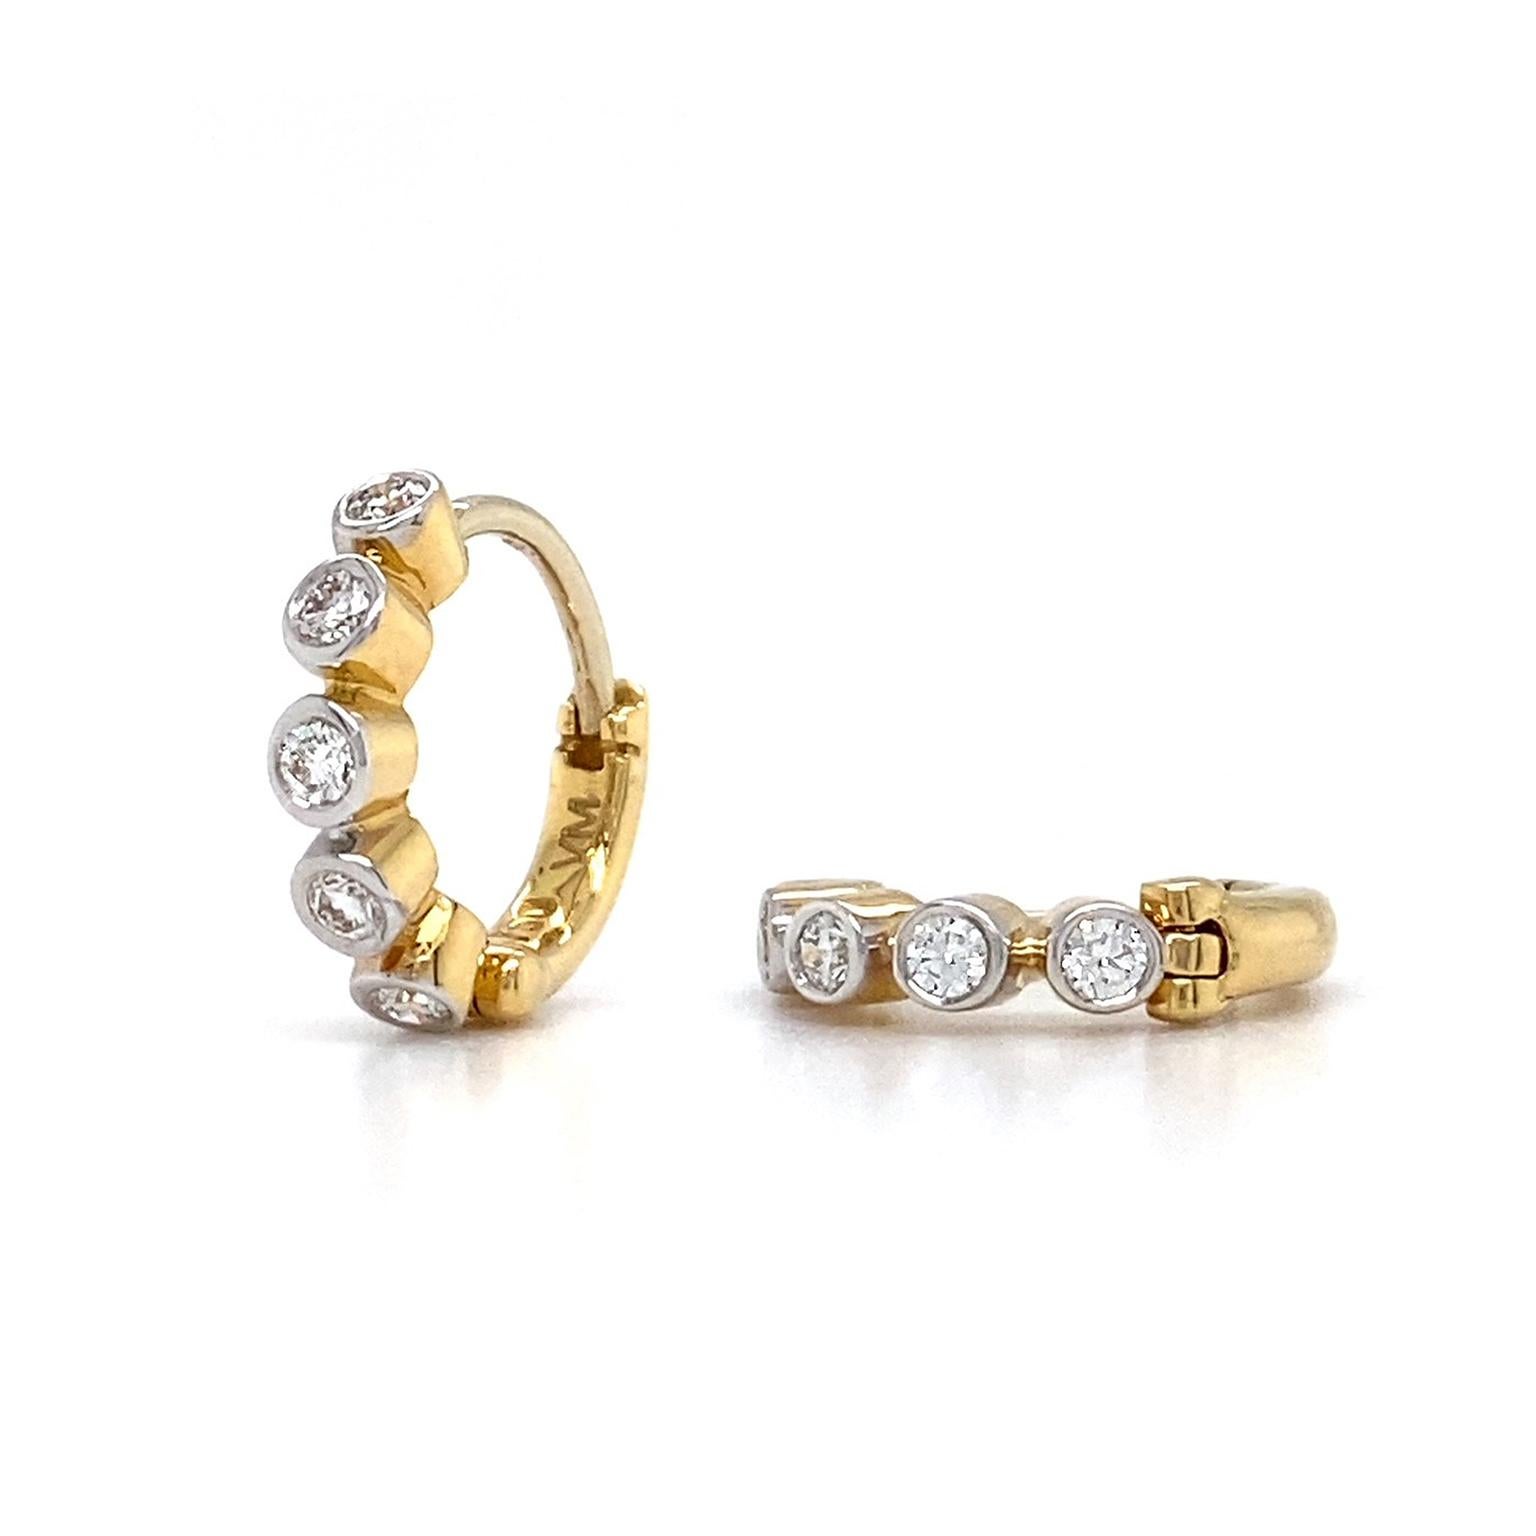 Valentin Magro 18 Karat Yellow Gold Diamond Hoop Earrings transform precious metal and texture into one. The foundation is 18k yellow gold, creating five linked bezel settings for each of the featured diamonds. These jewels are round brilliant cut